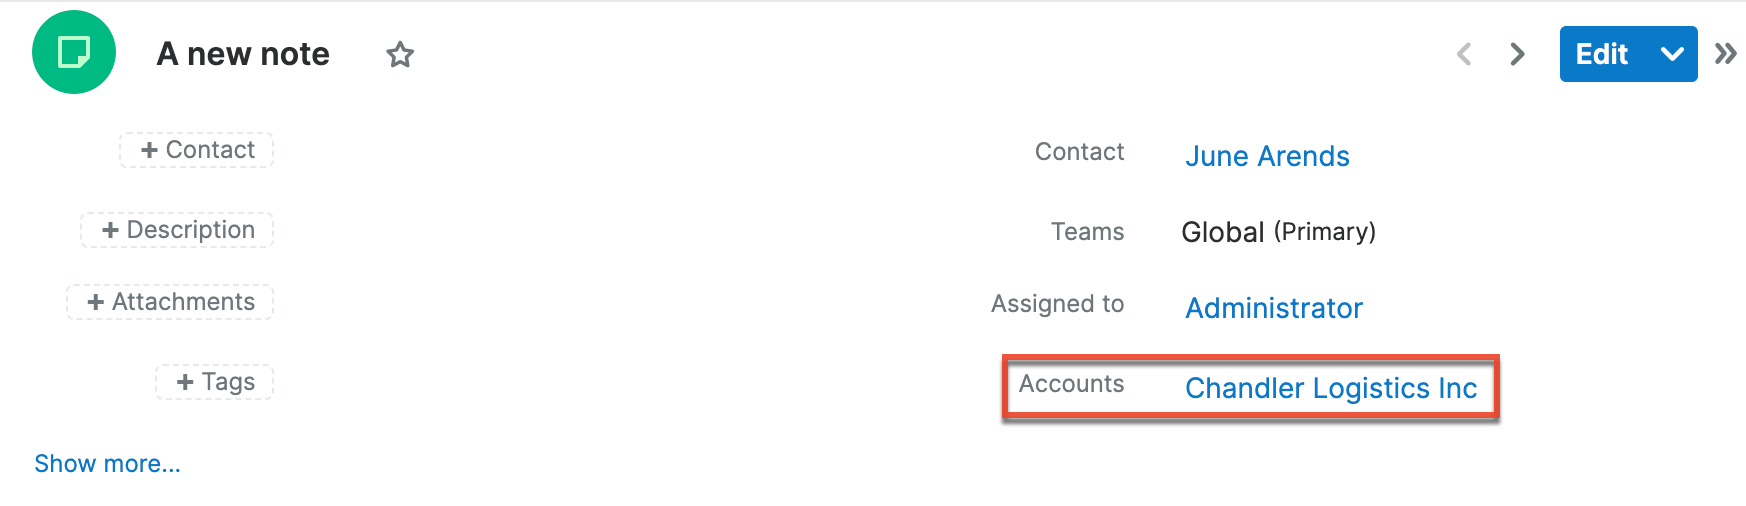 Note record view with account